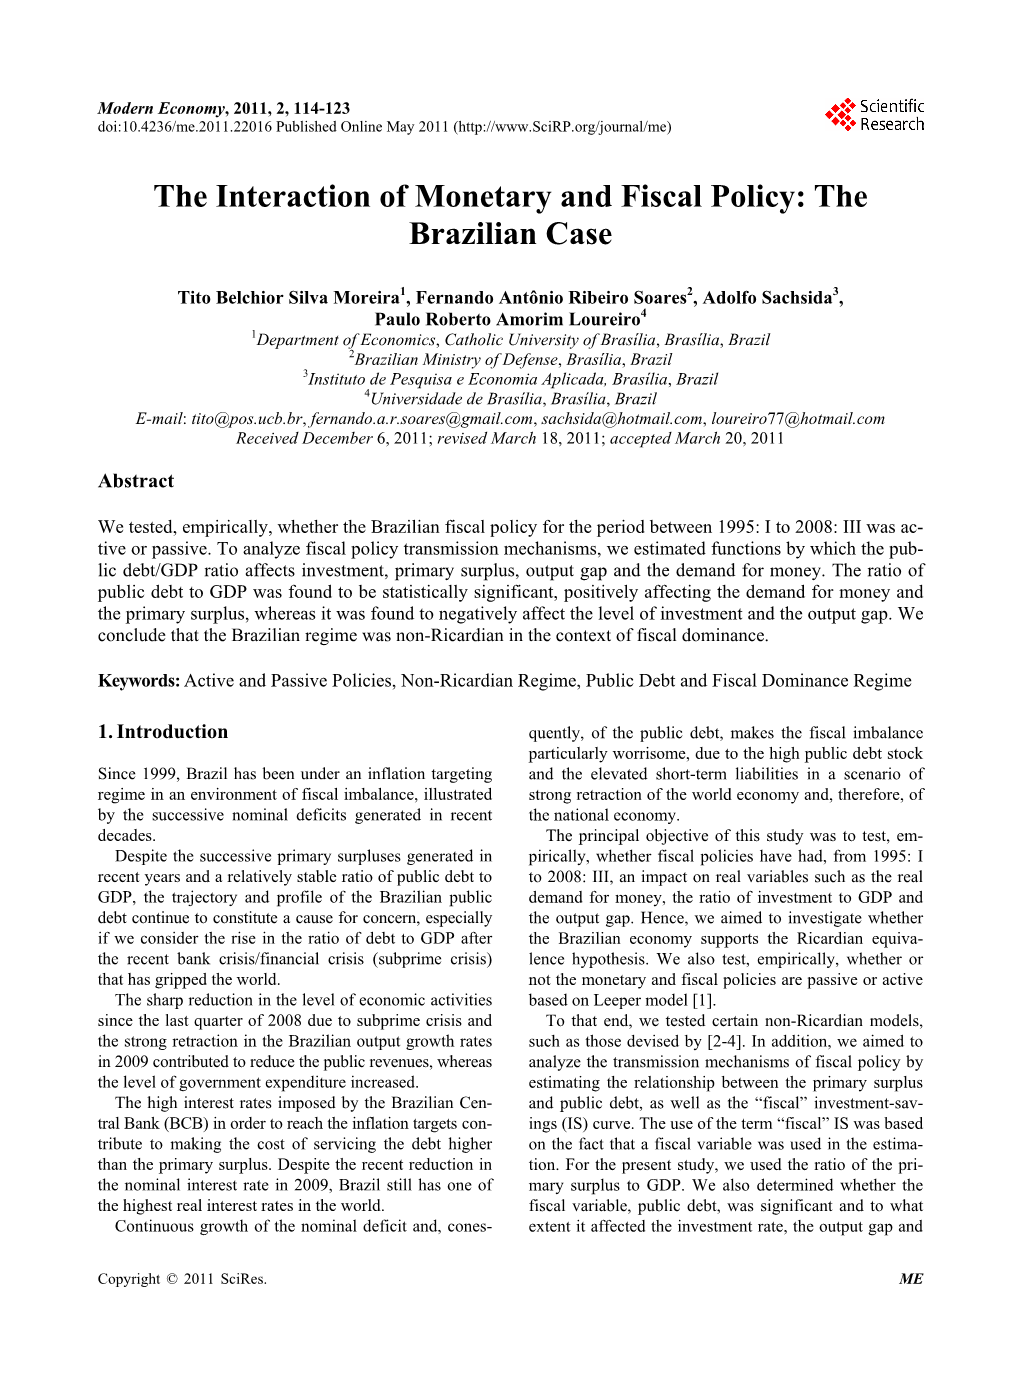 The Interaction of Monetary and Fiscal Policy: the Brazilian Case